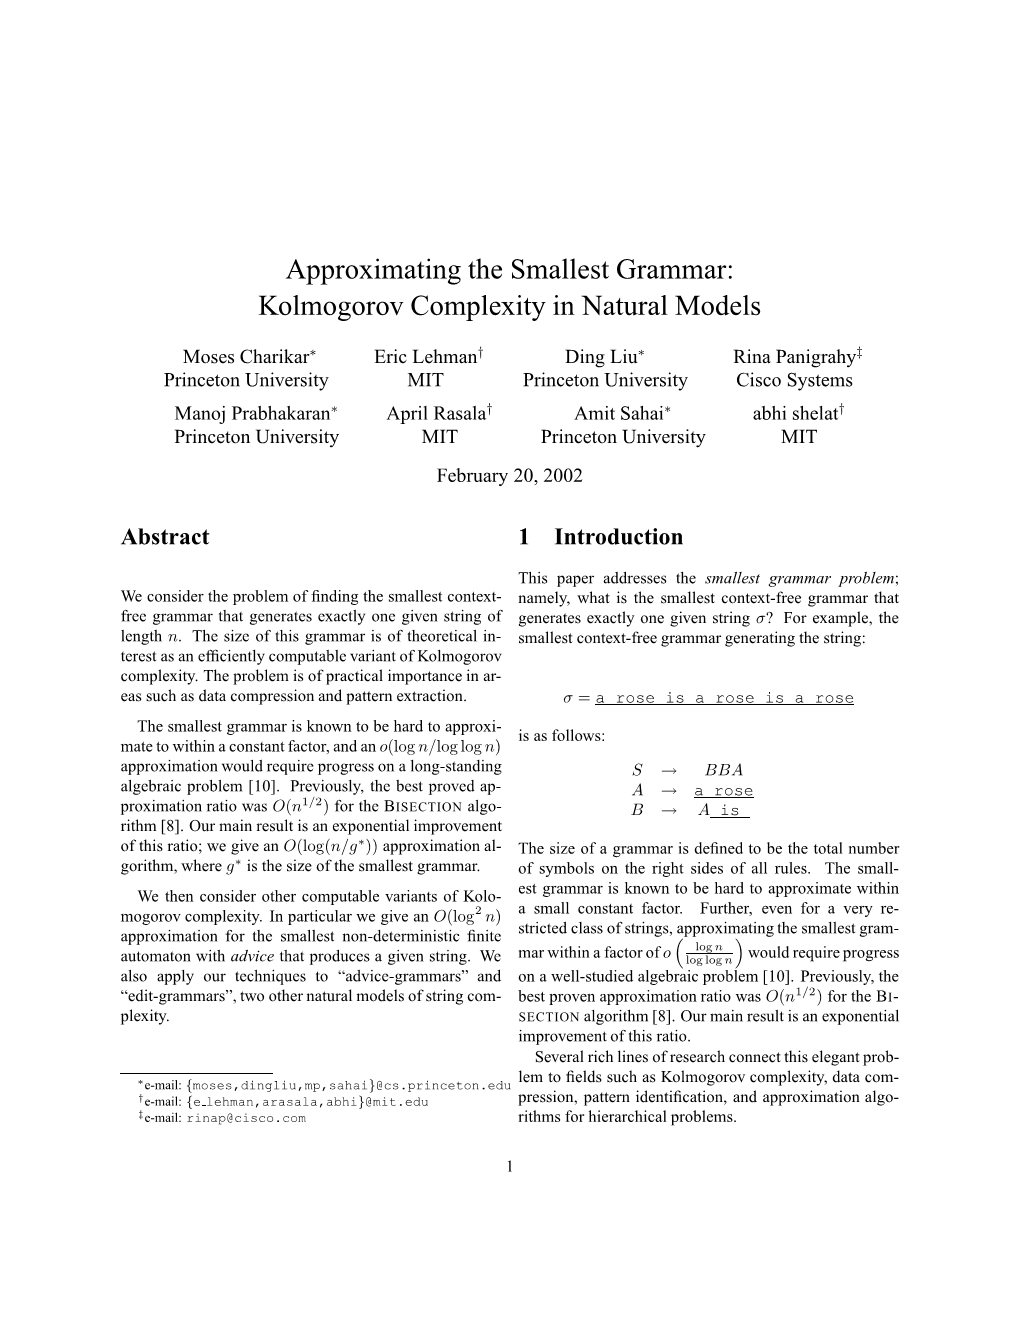 Approximating the Smallest Grammar: Kolmogorov Complexity in Natural Models